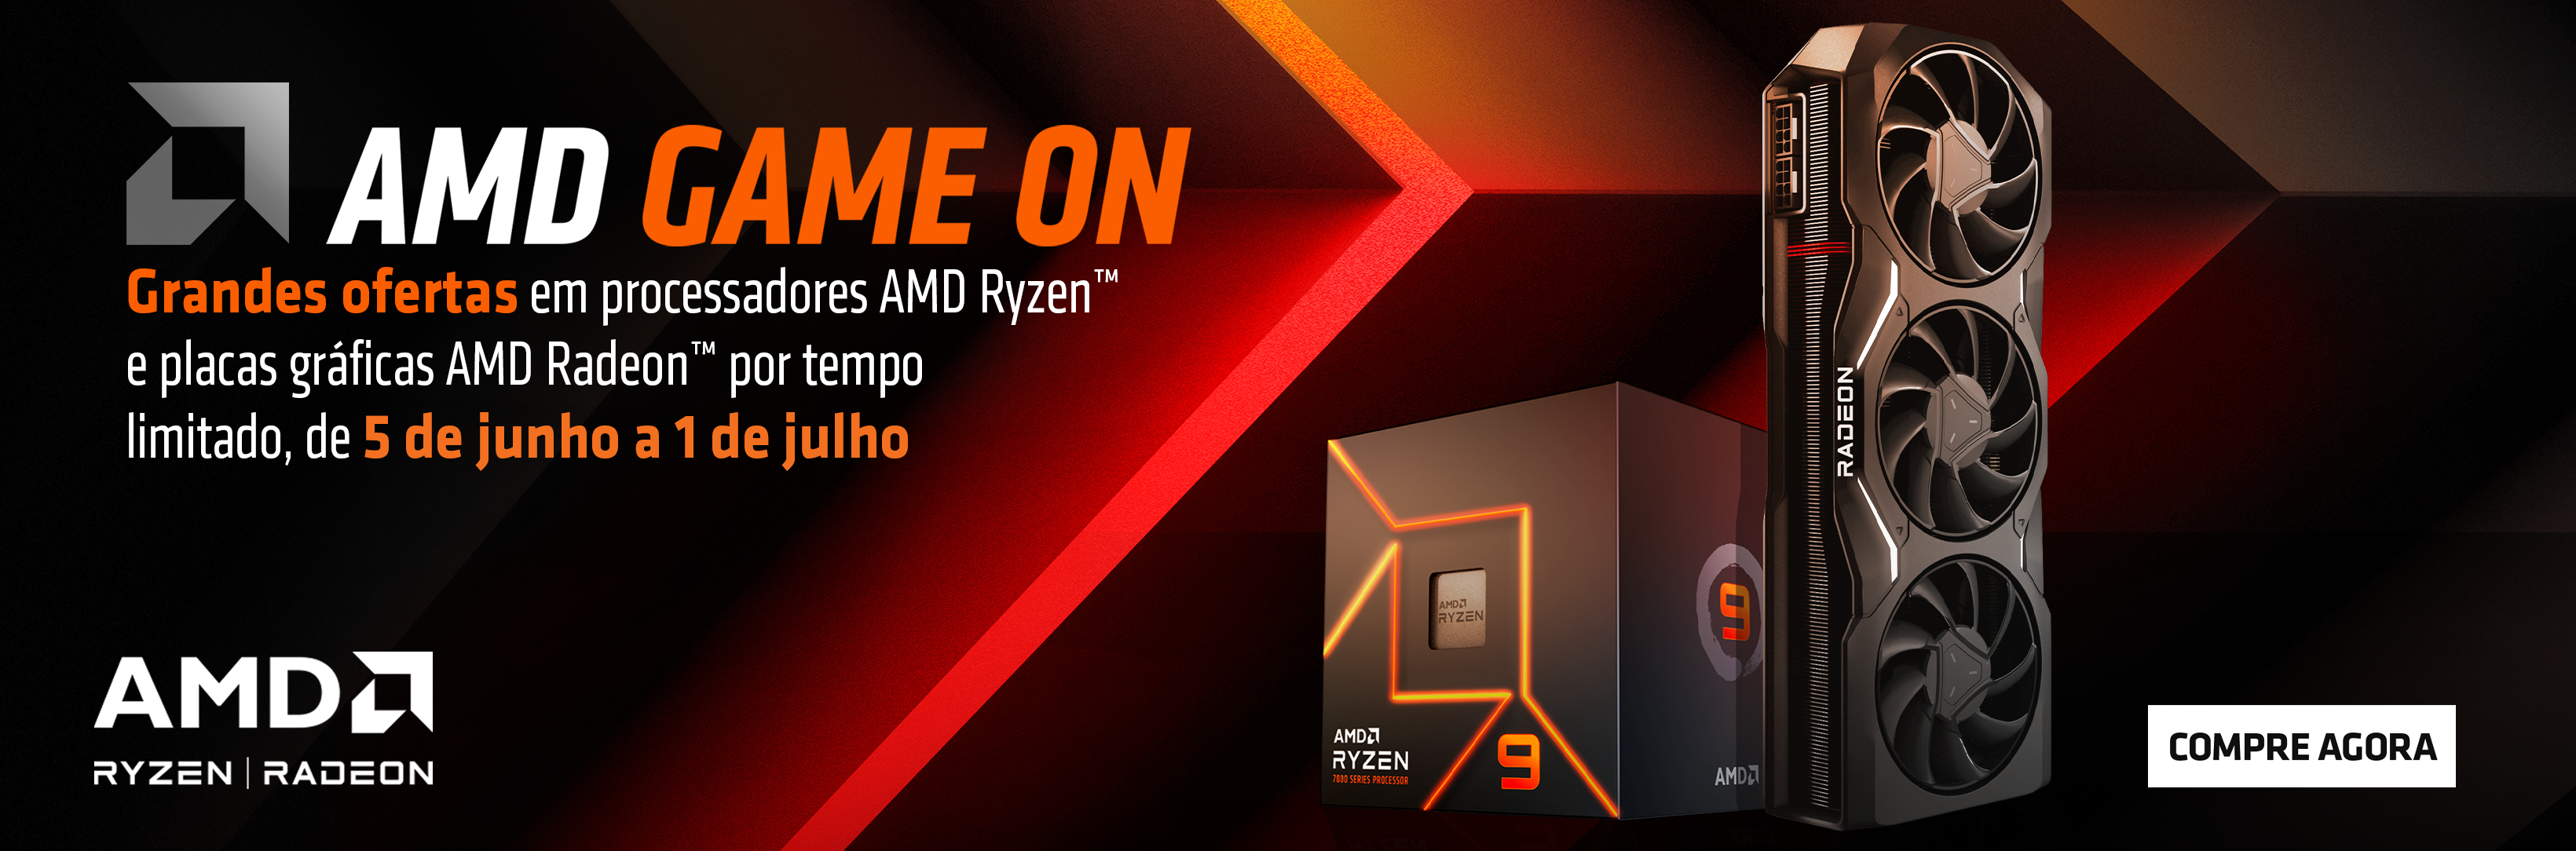 AMD Game ON